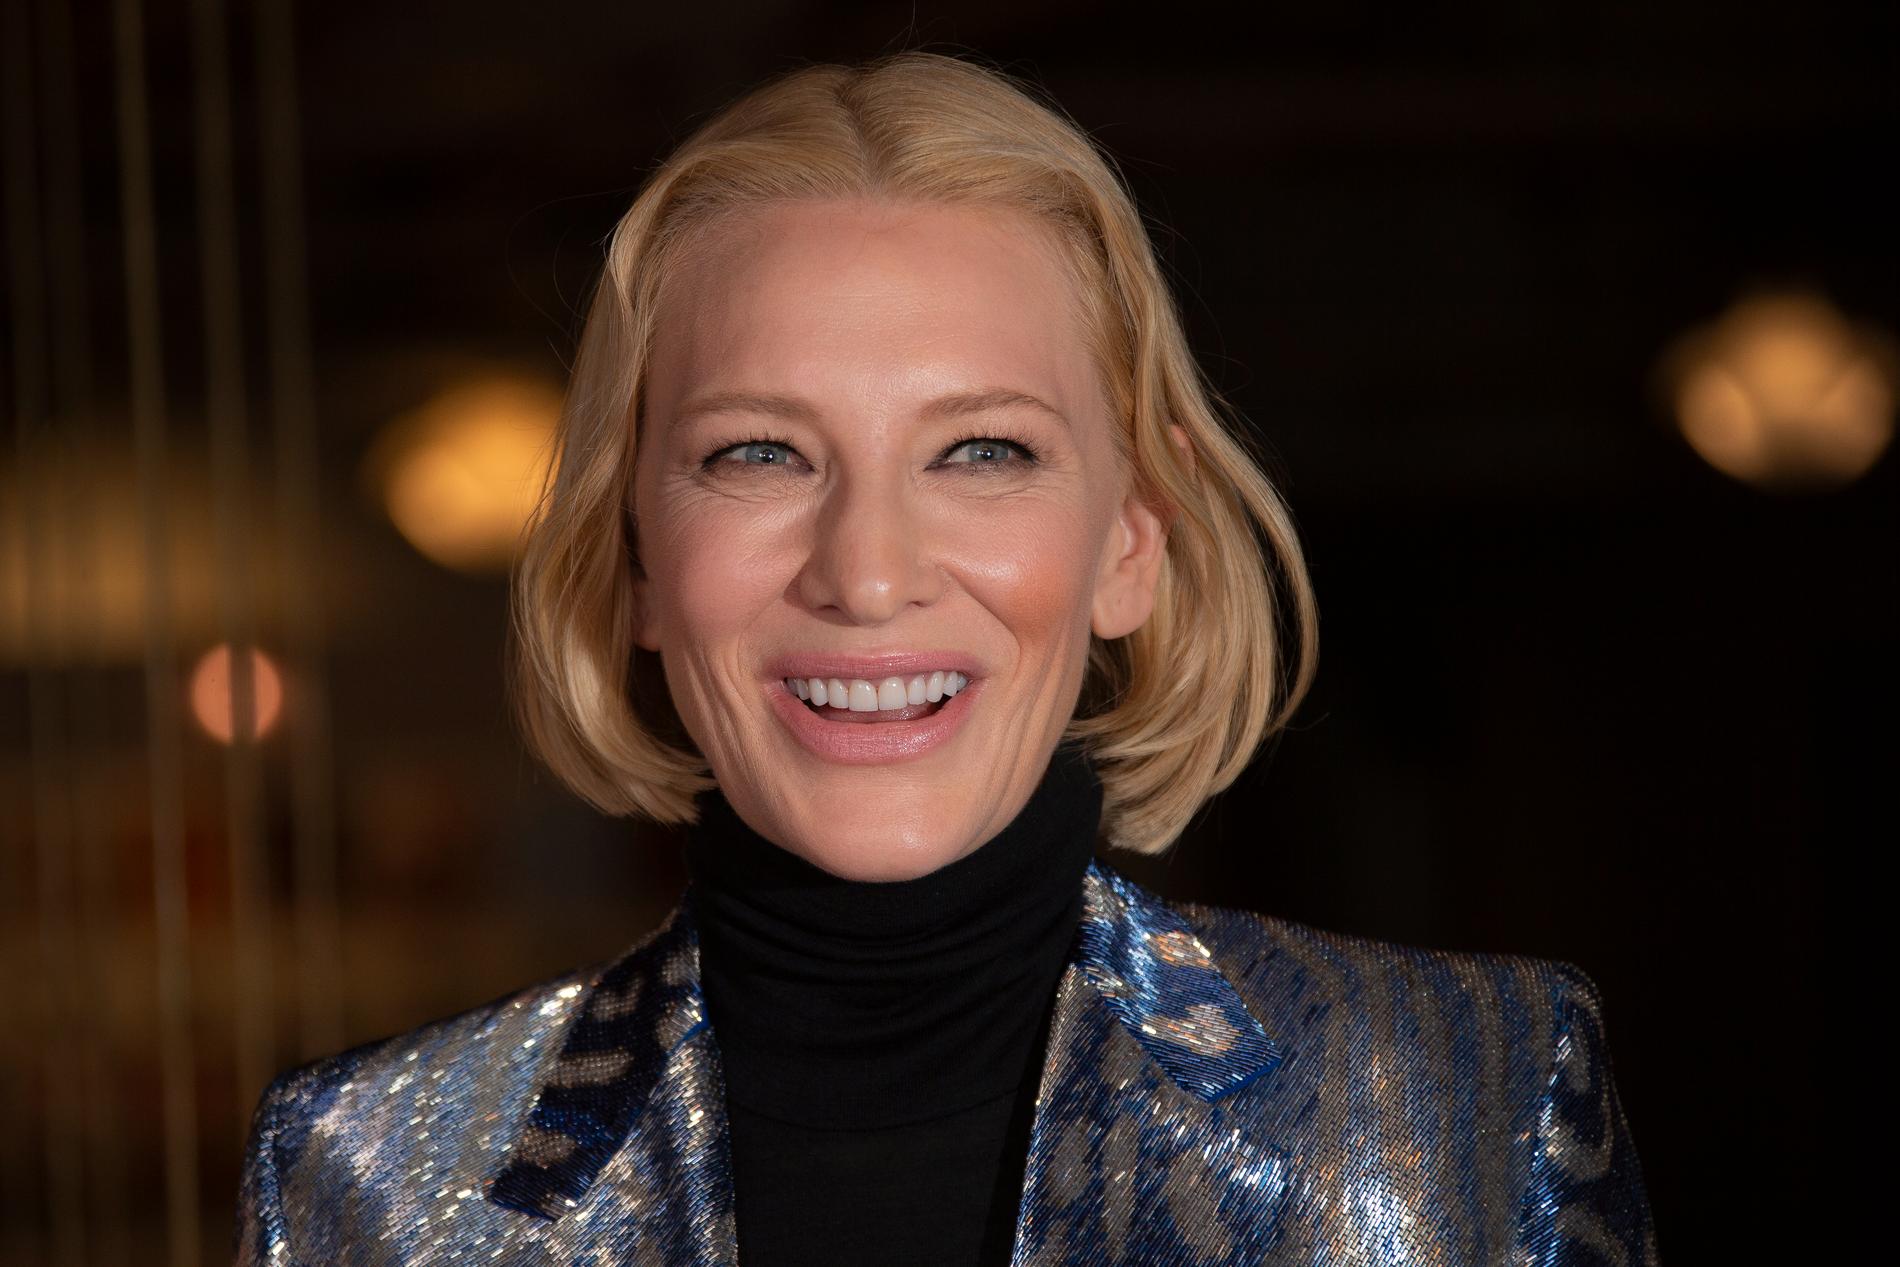 What Plastic Surgery Has Cate Blanchett Gotten? Body Measurements and Wiki